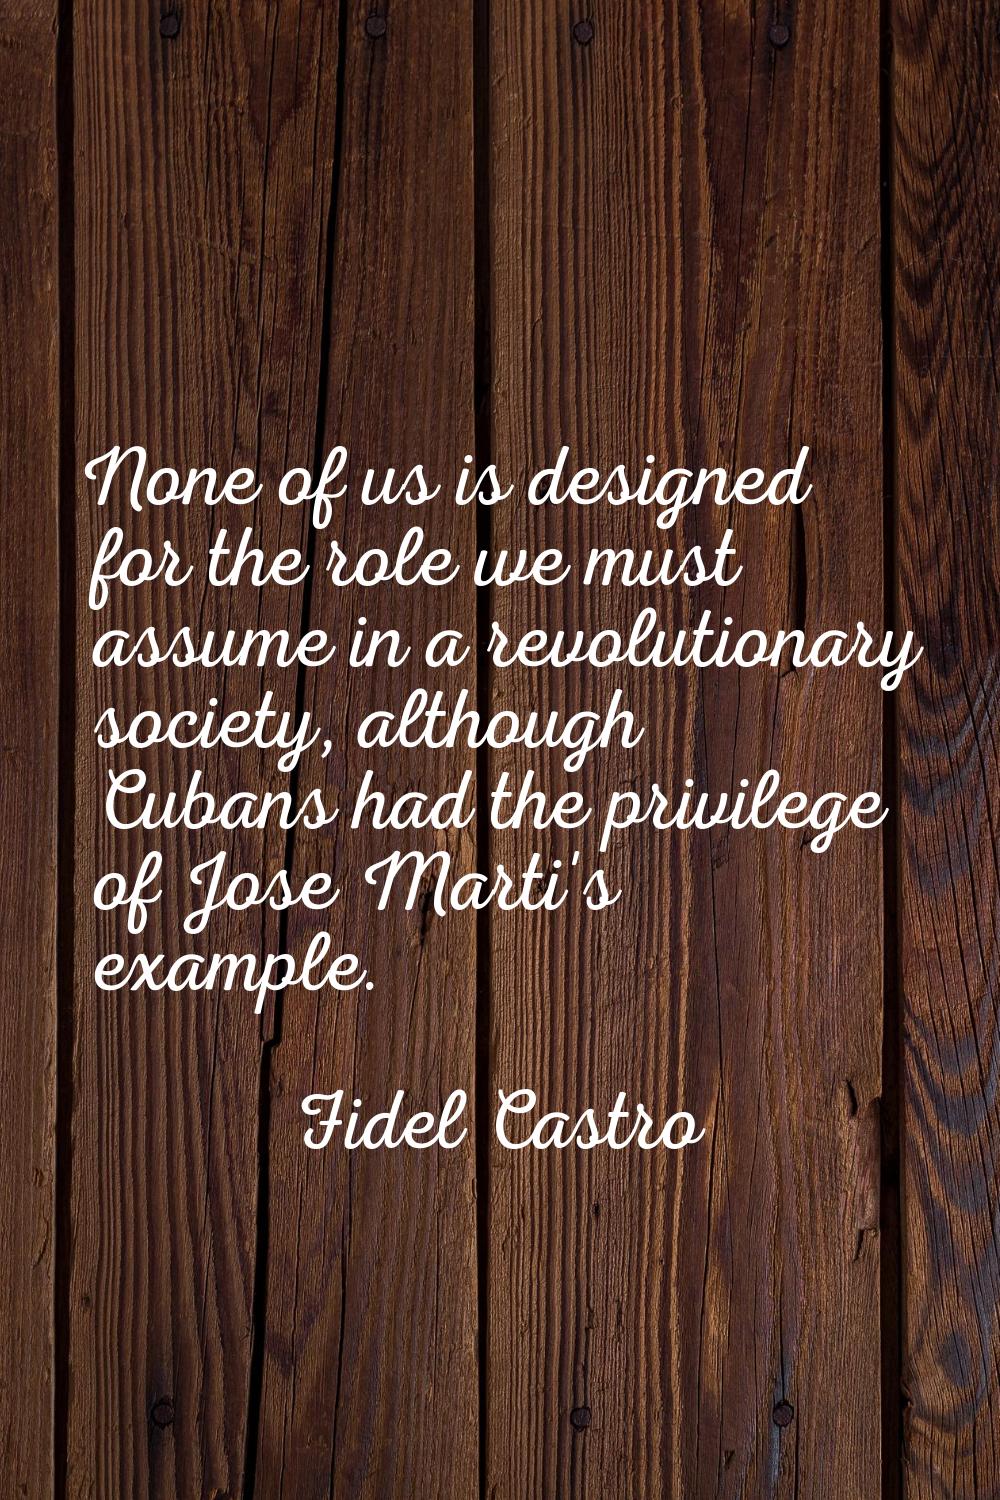 None of us is designed for the role we must assume in a revolutionary society, although Cubans had 